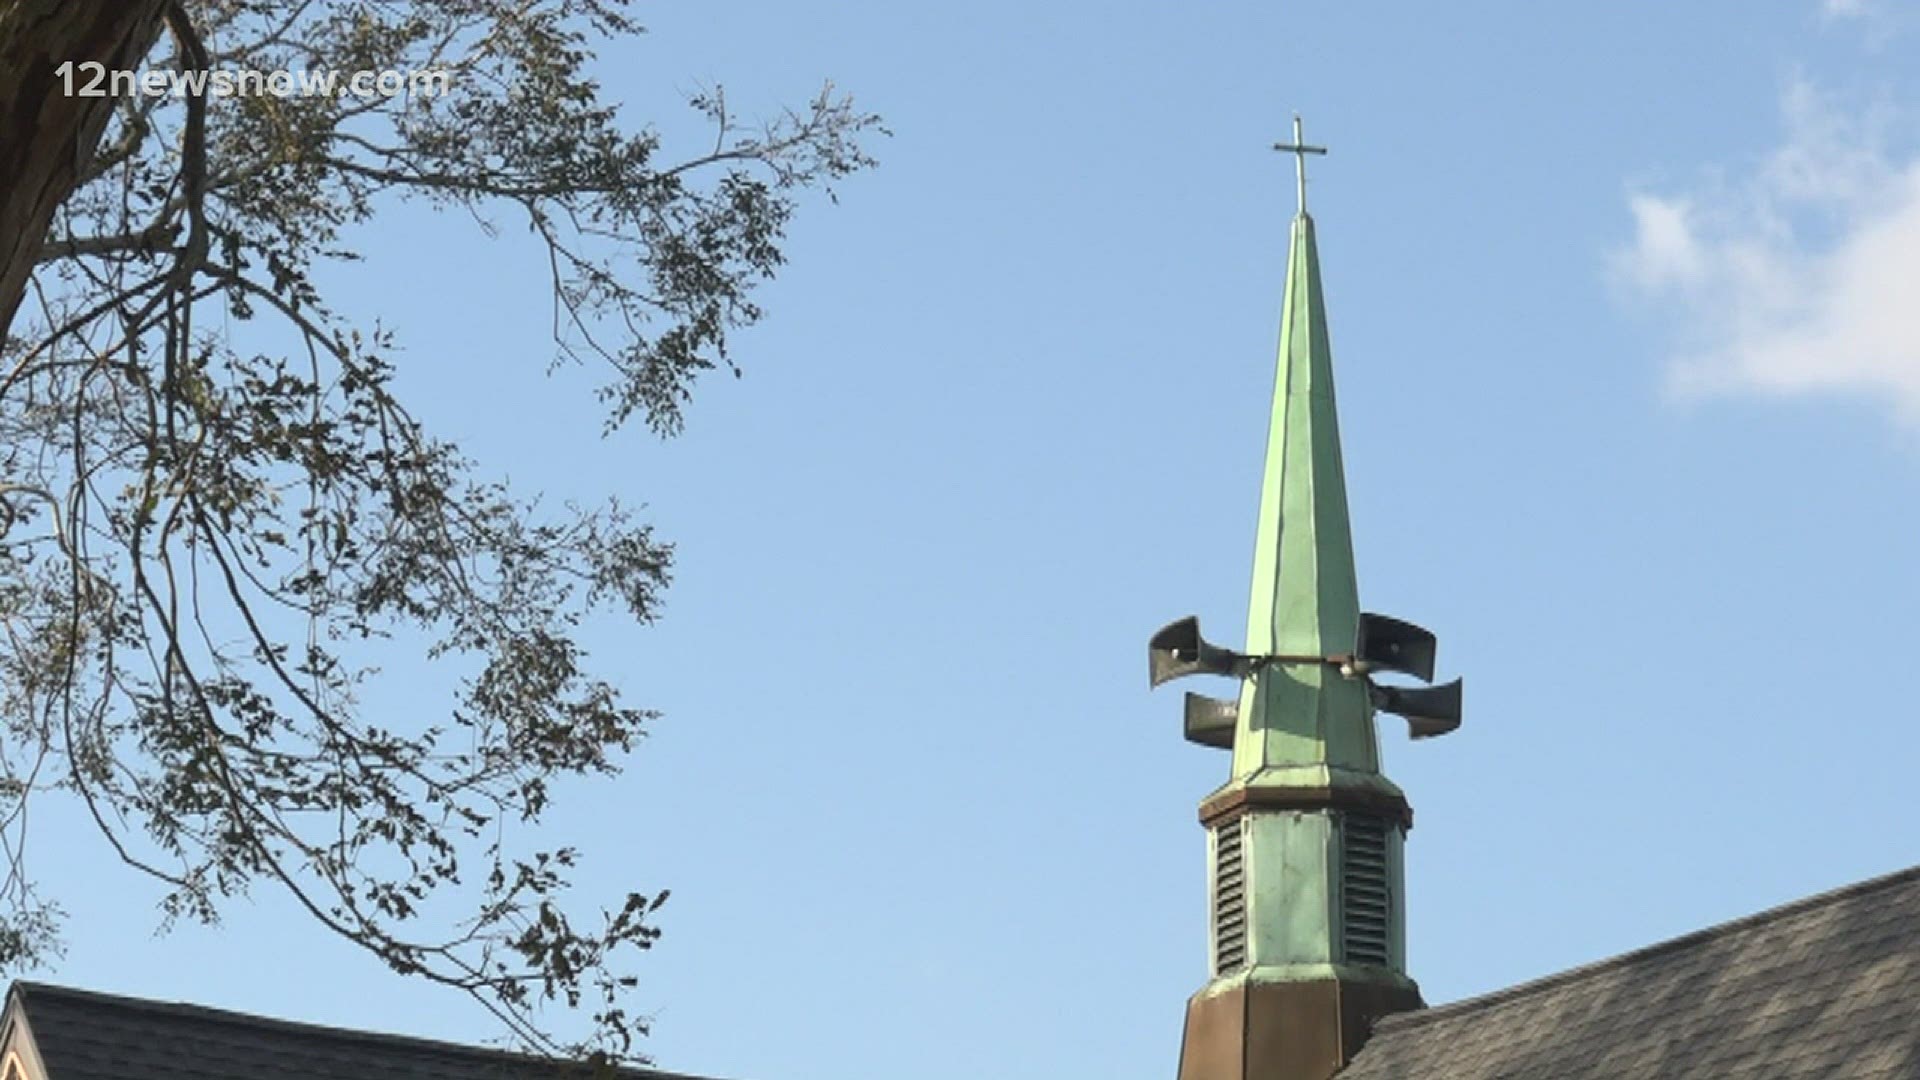 The Groves Municipal Court confirmed with 12News Tuesday that the noise complaint involving the church bells has been dismissed.